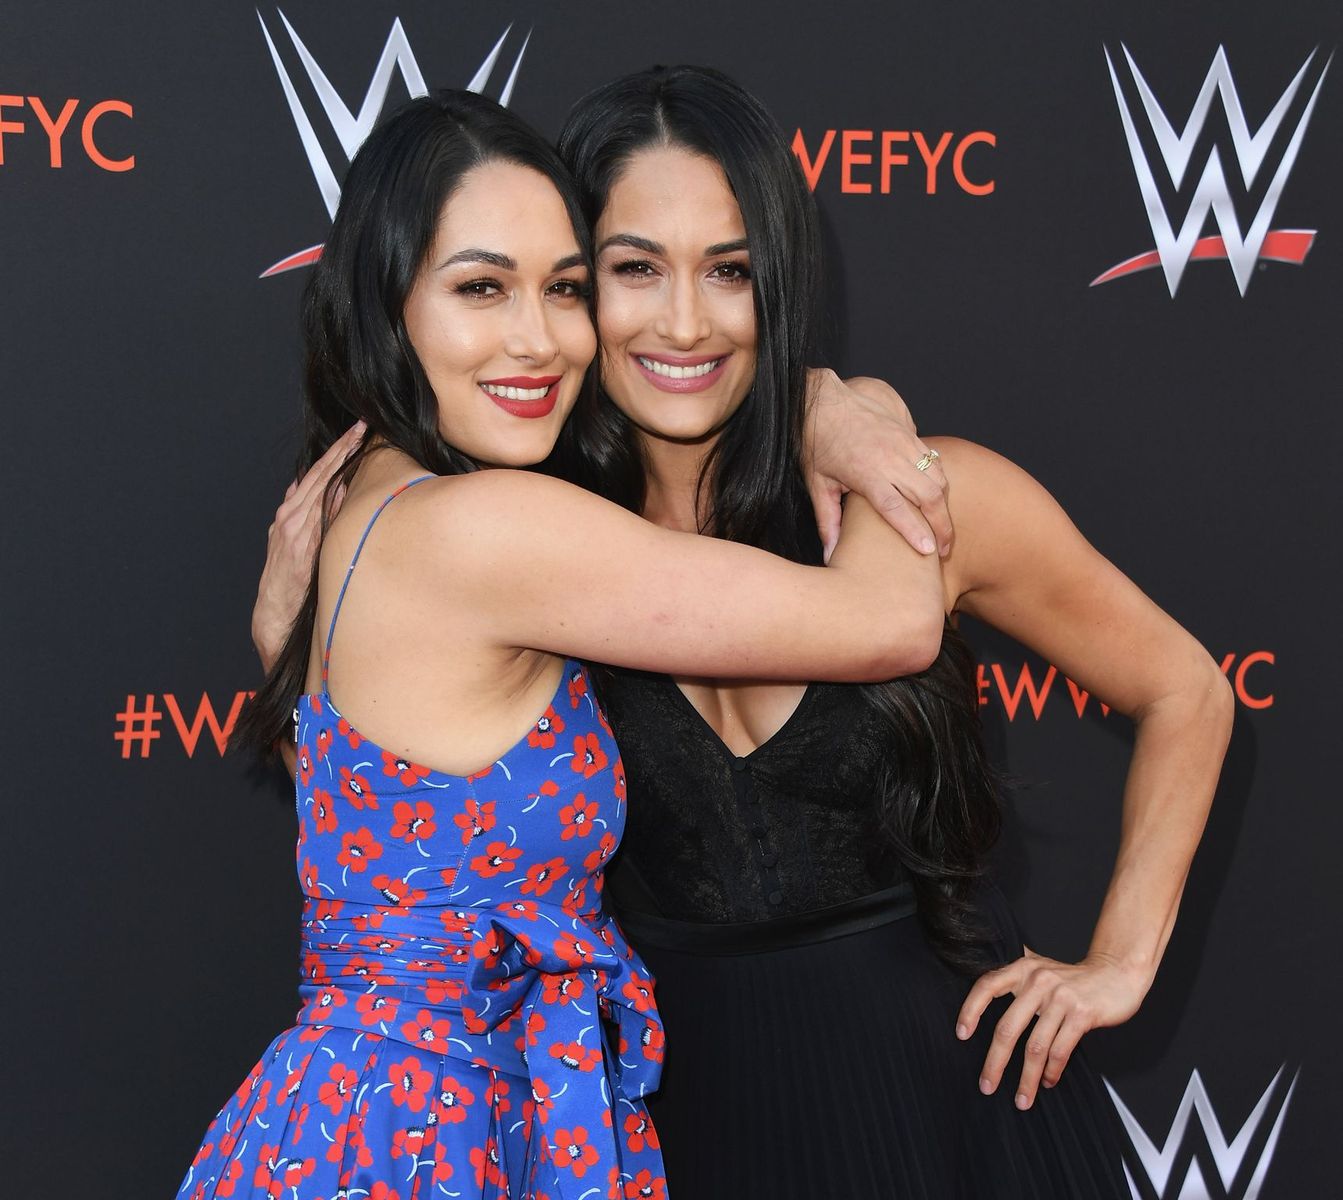 Brie and Nikki Bella at WWE's First-Ever Emmy "For Your Consideration" event on June 6, 2018, in North Hollywood, California | Photo: Jon Kopaloff/Getty Images